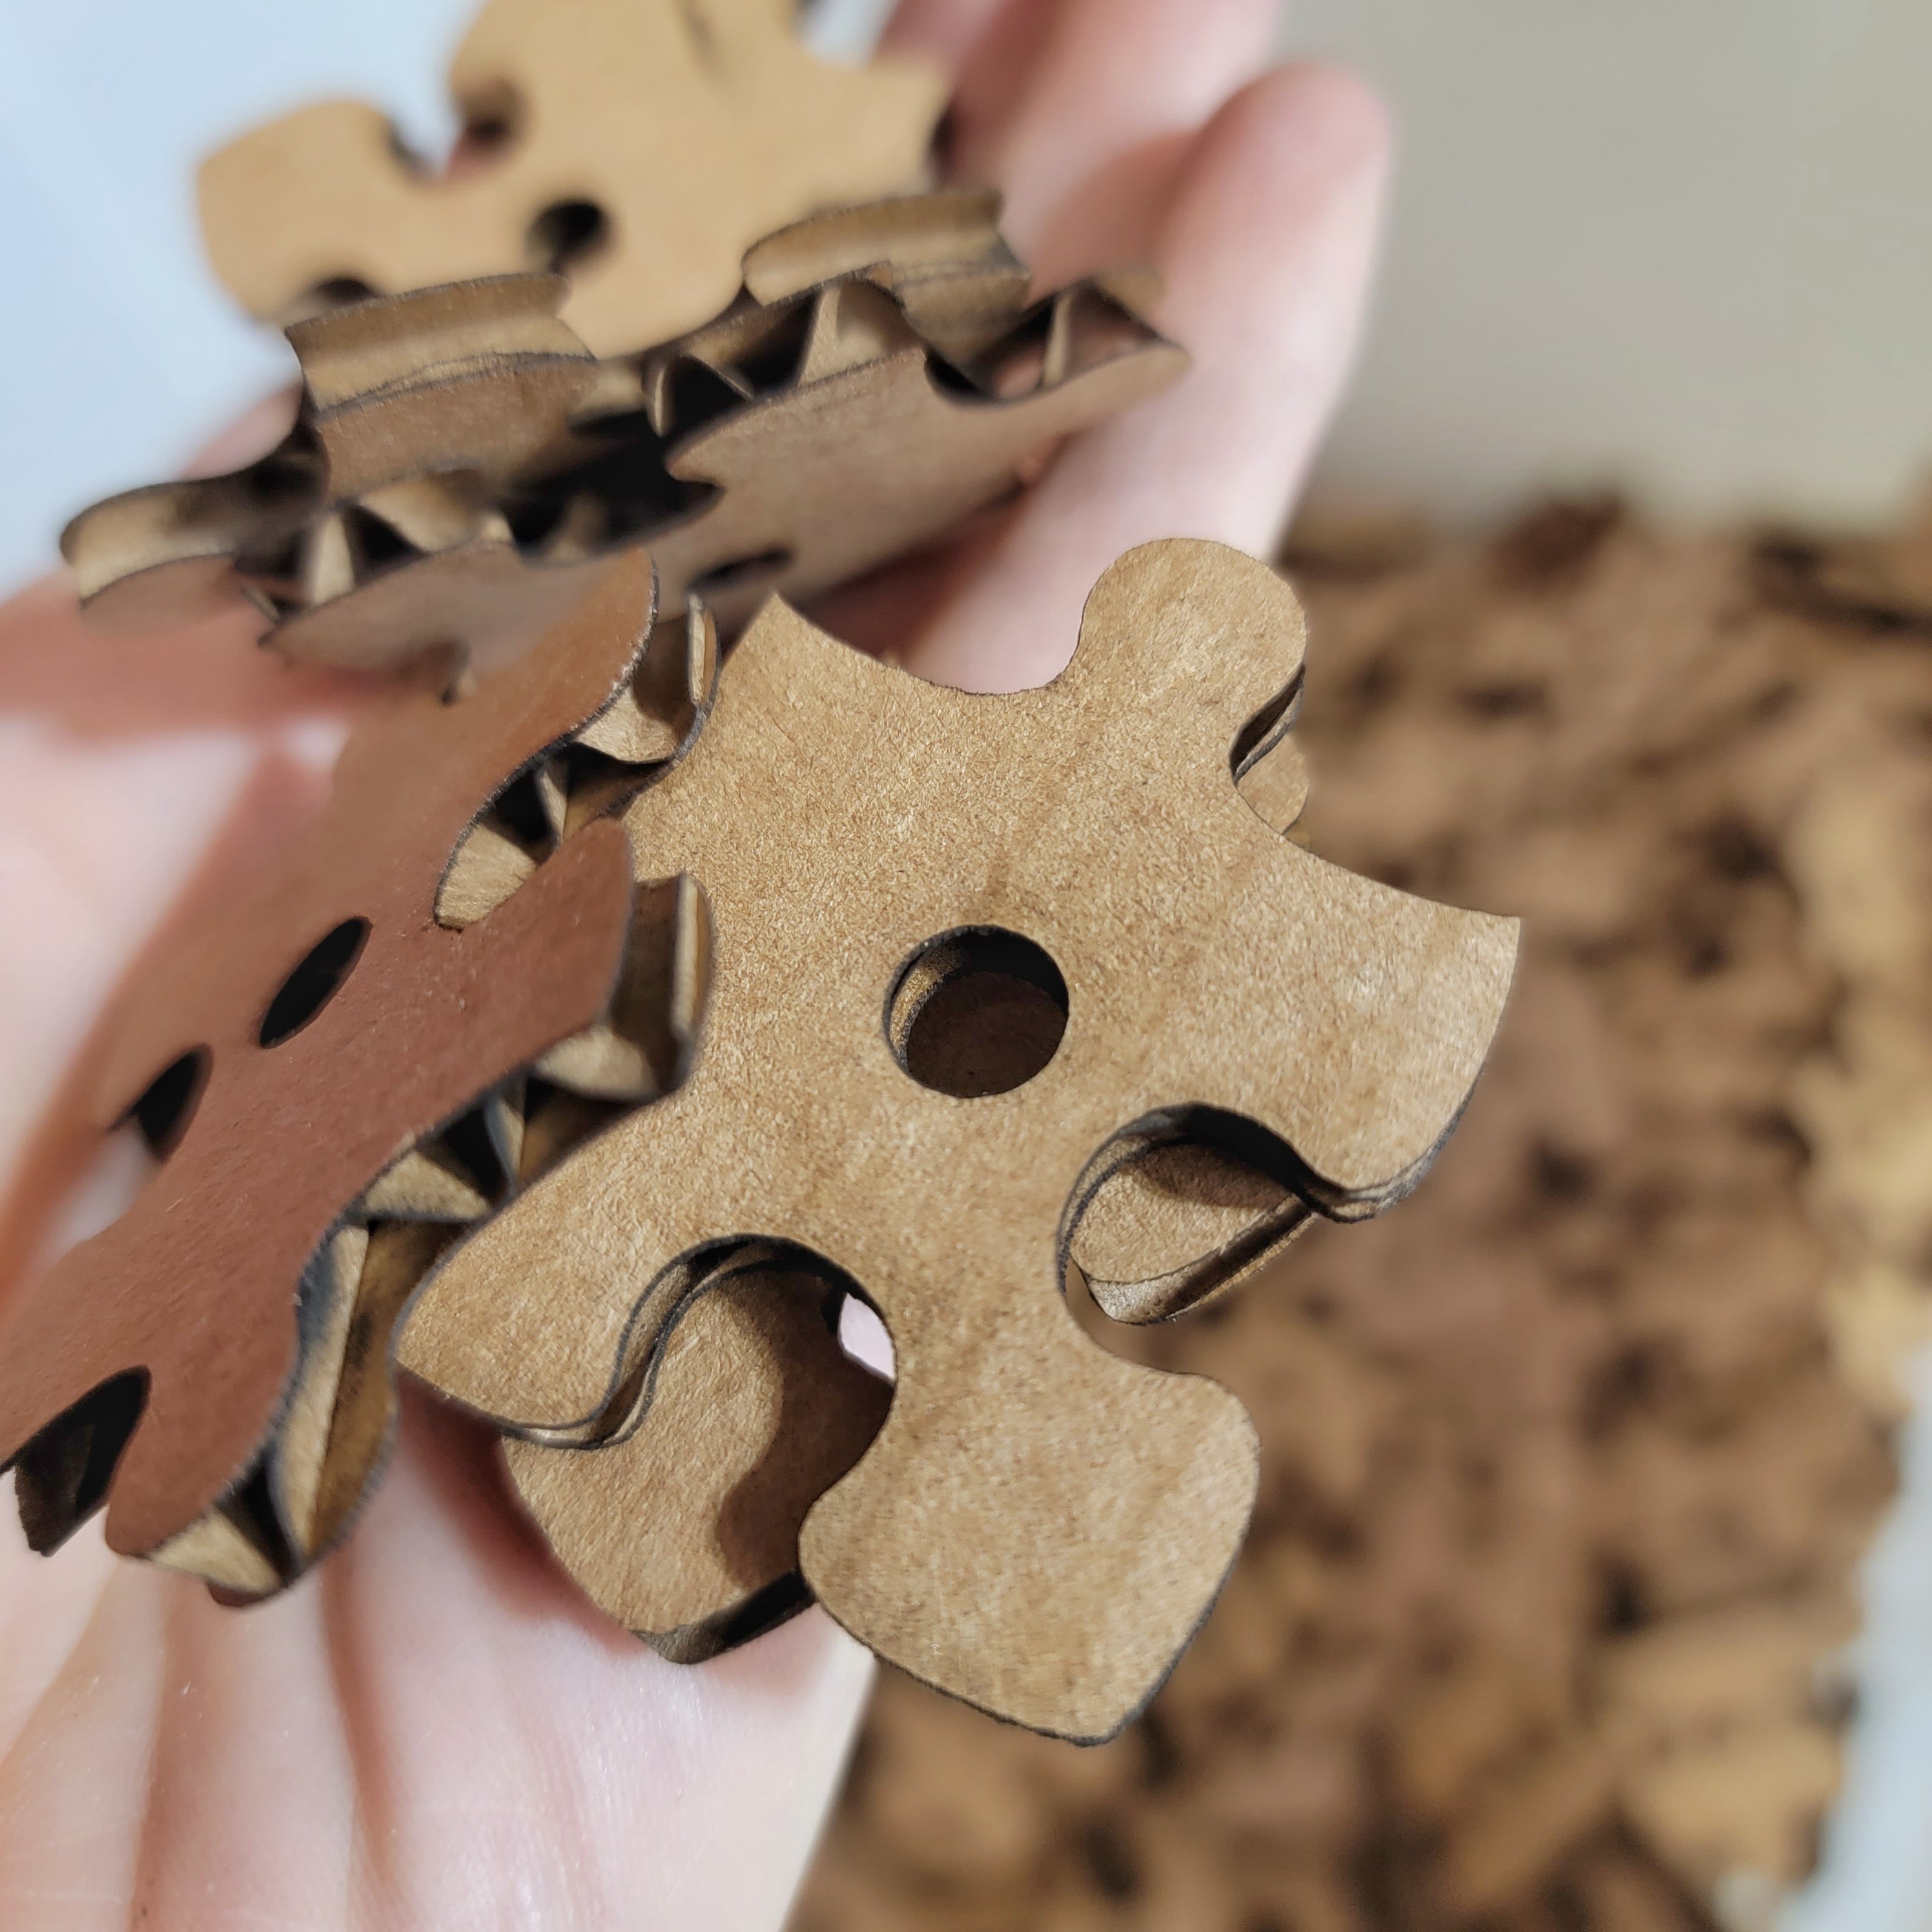 Cardboard Puzzle Pieces - 25 Pack